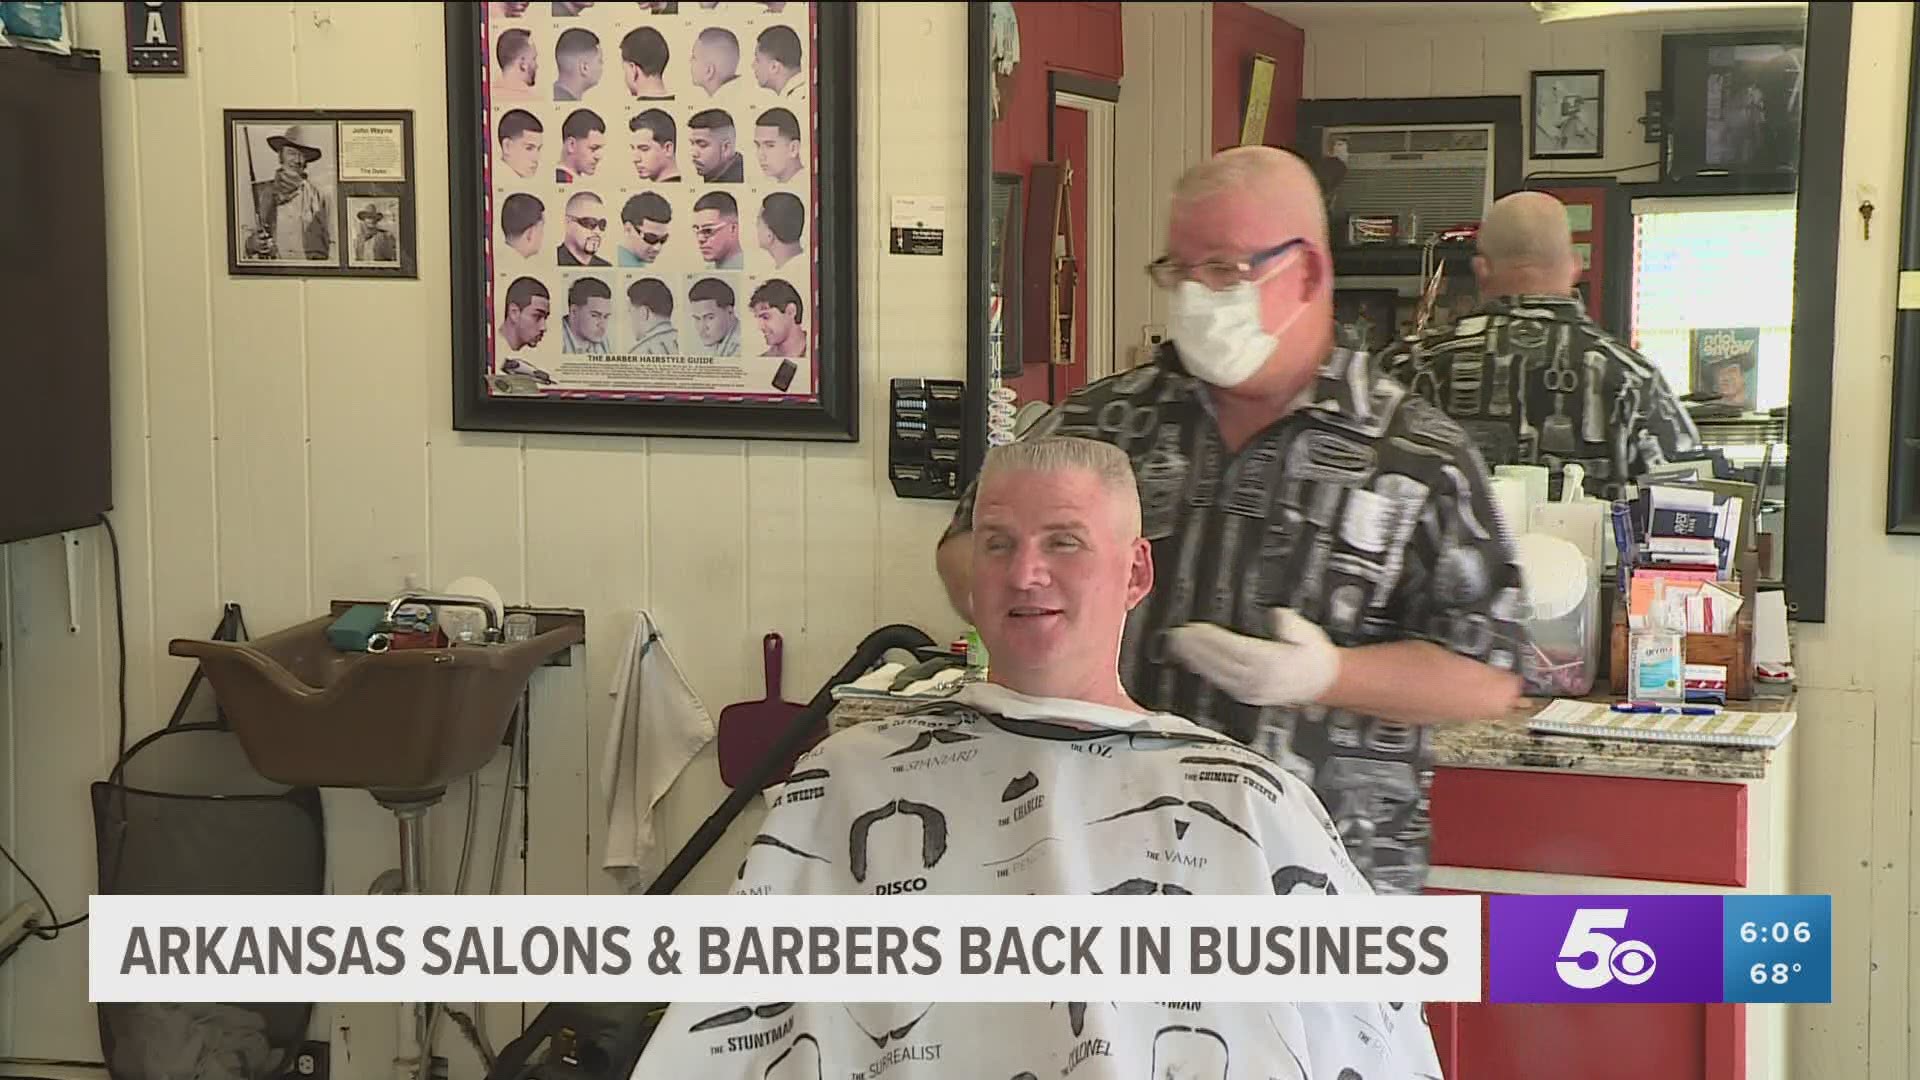 Arkansas salons and barbers back in business